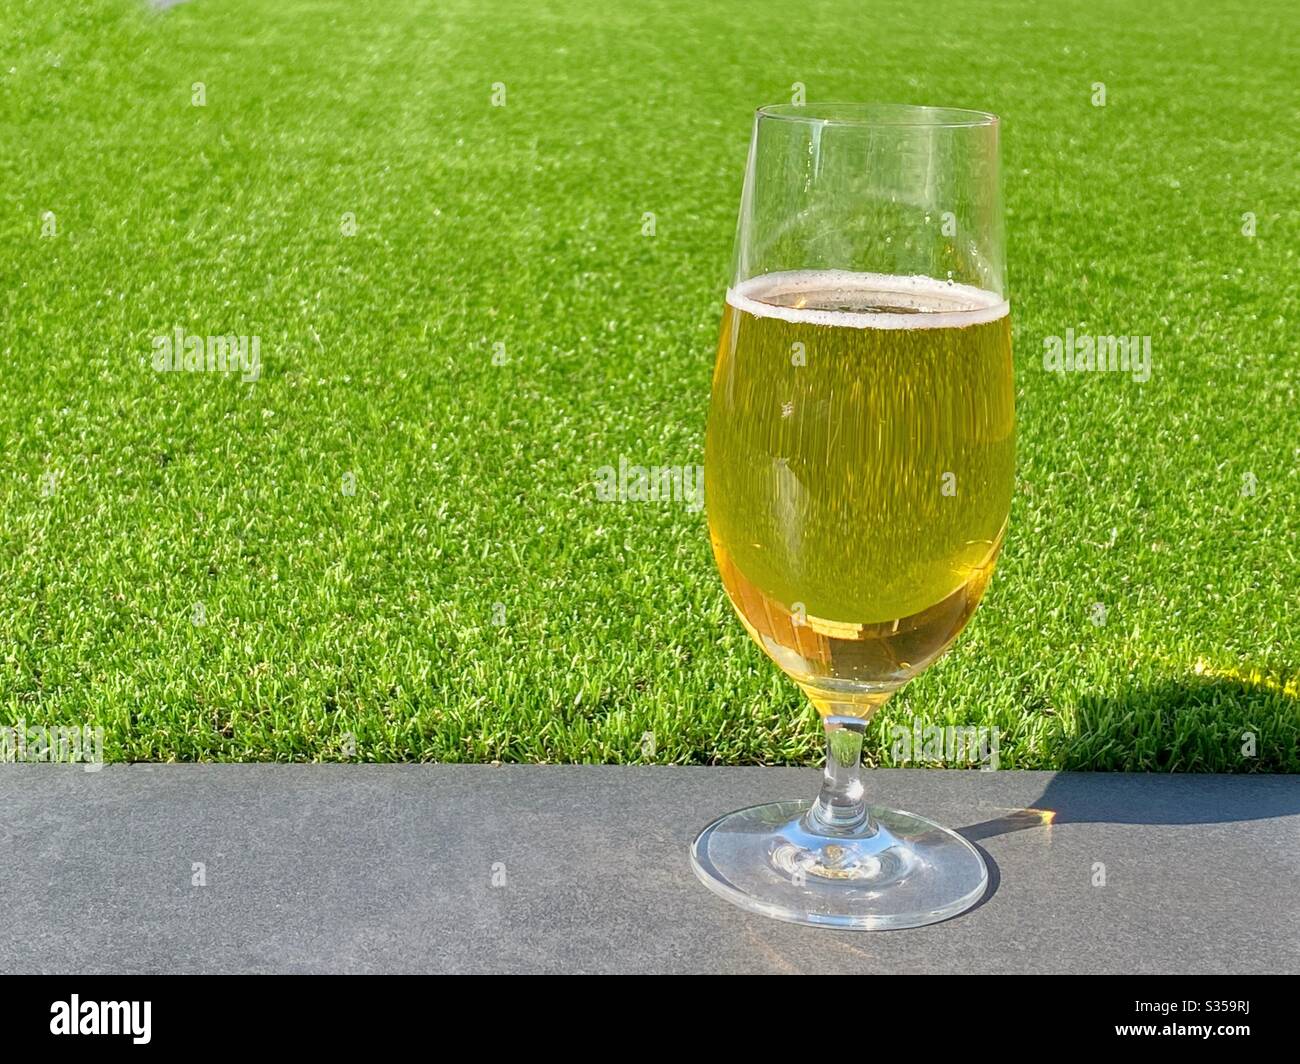 Glass of golden lager beer on a garden wall against a background of short grass on a lawn Stock Photo